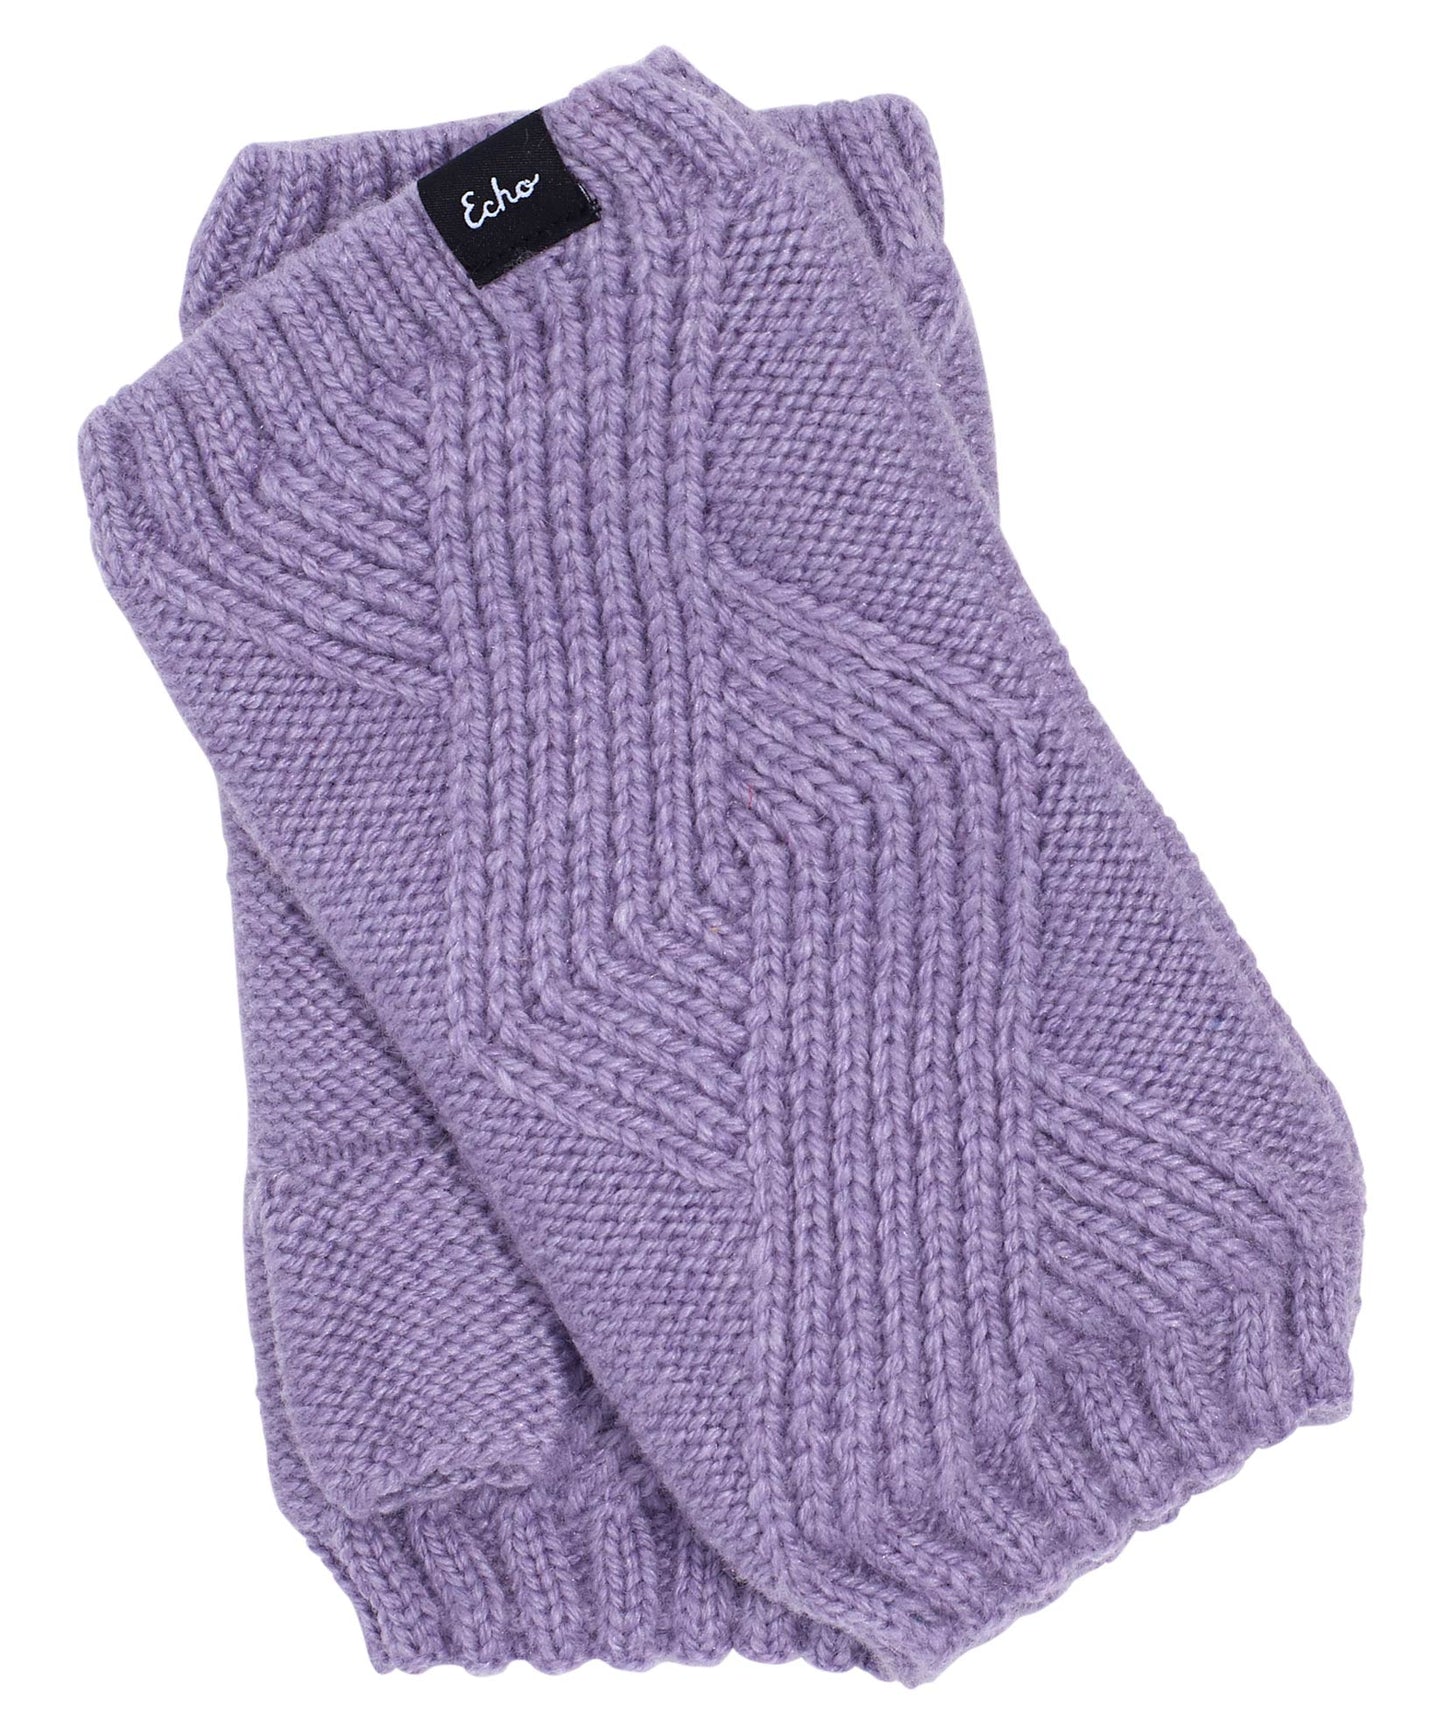 Recycled Cable Fingerless Glove in color Iris